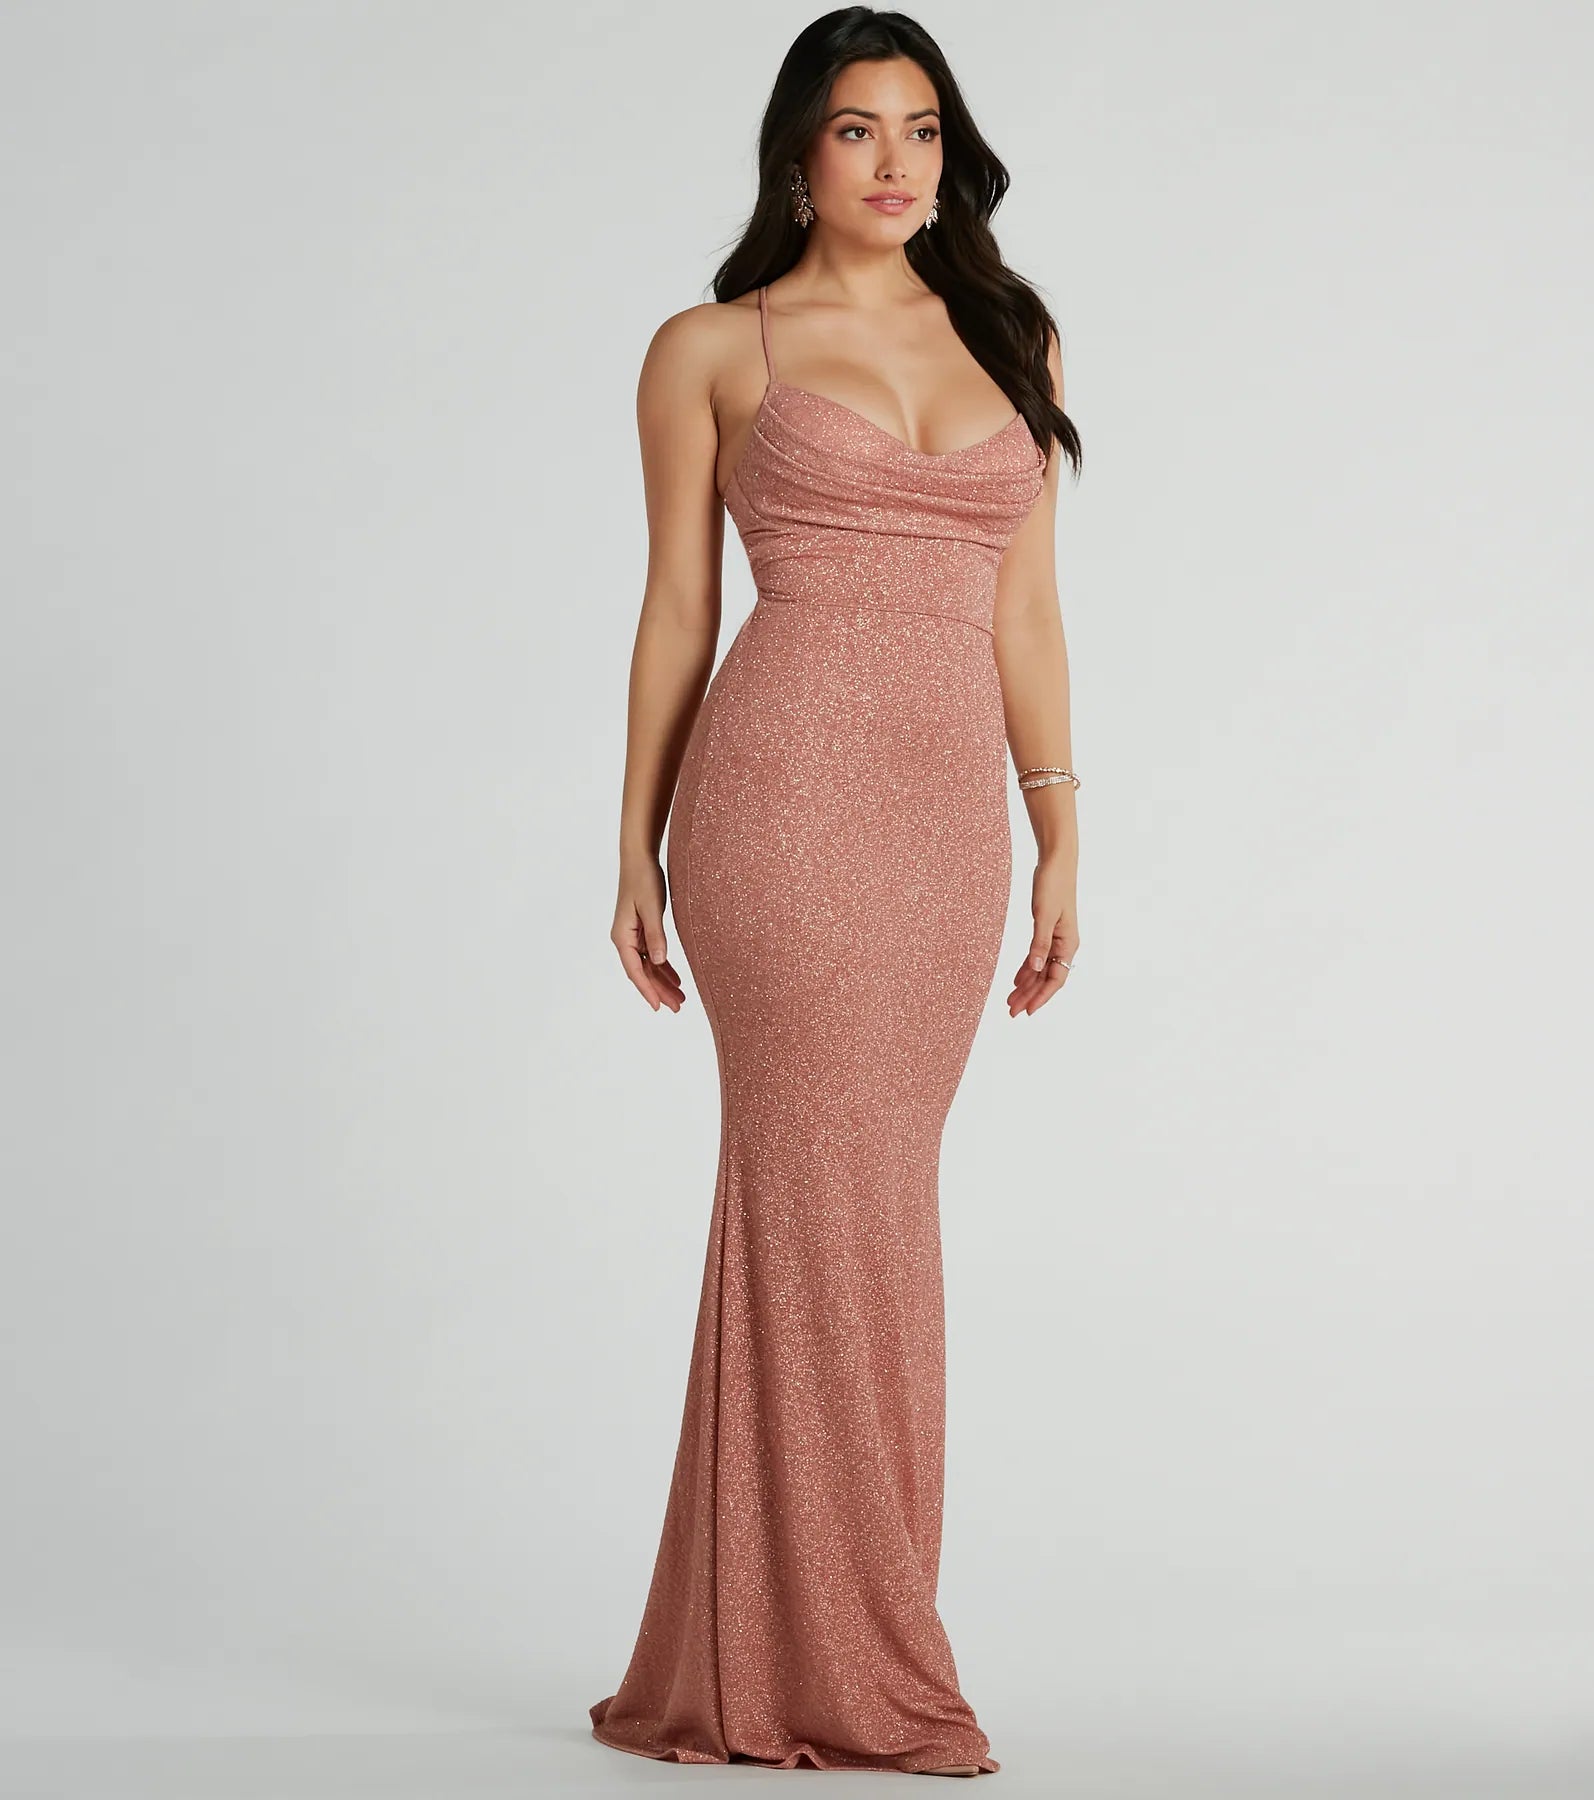 Sophisticated Glittering Lace-Up Stretchy Spaghetti Strap Floor Length Knit Mermaid Cowl Neck Prom Dress/Party Dress